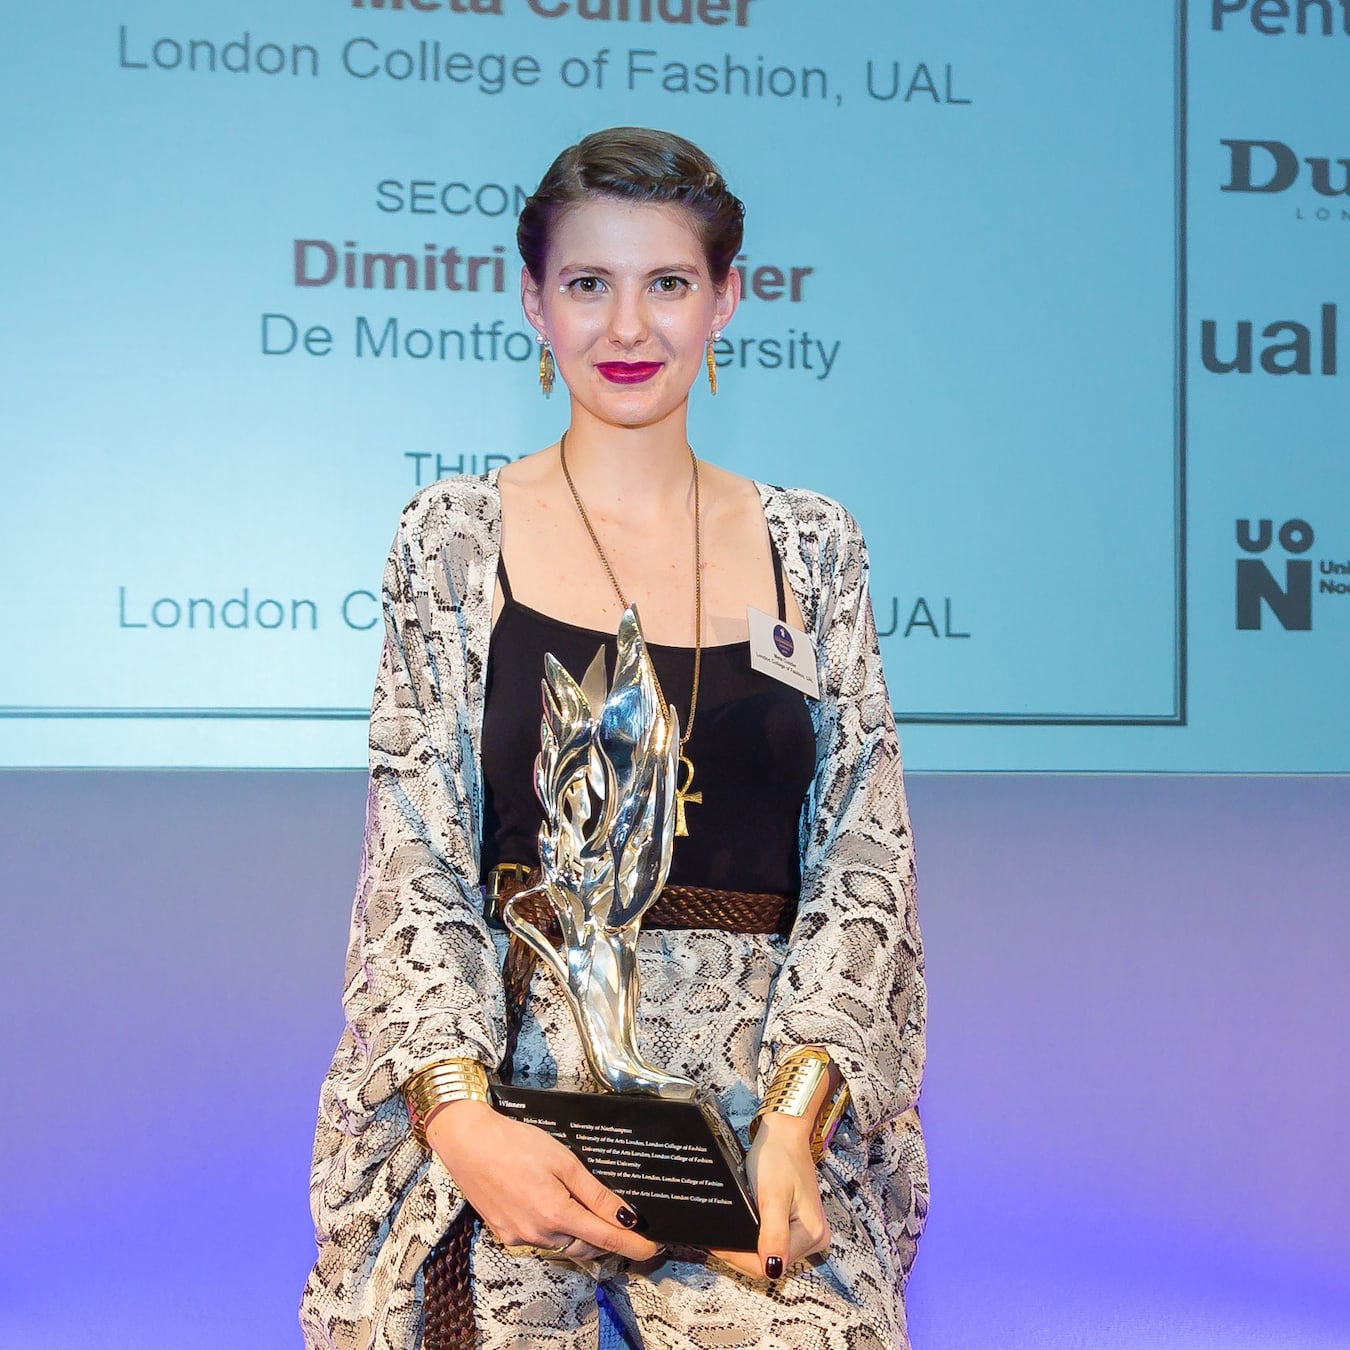 Project-LCF graduate wins 1st prize at the National Footwear Student of the Year Awards